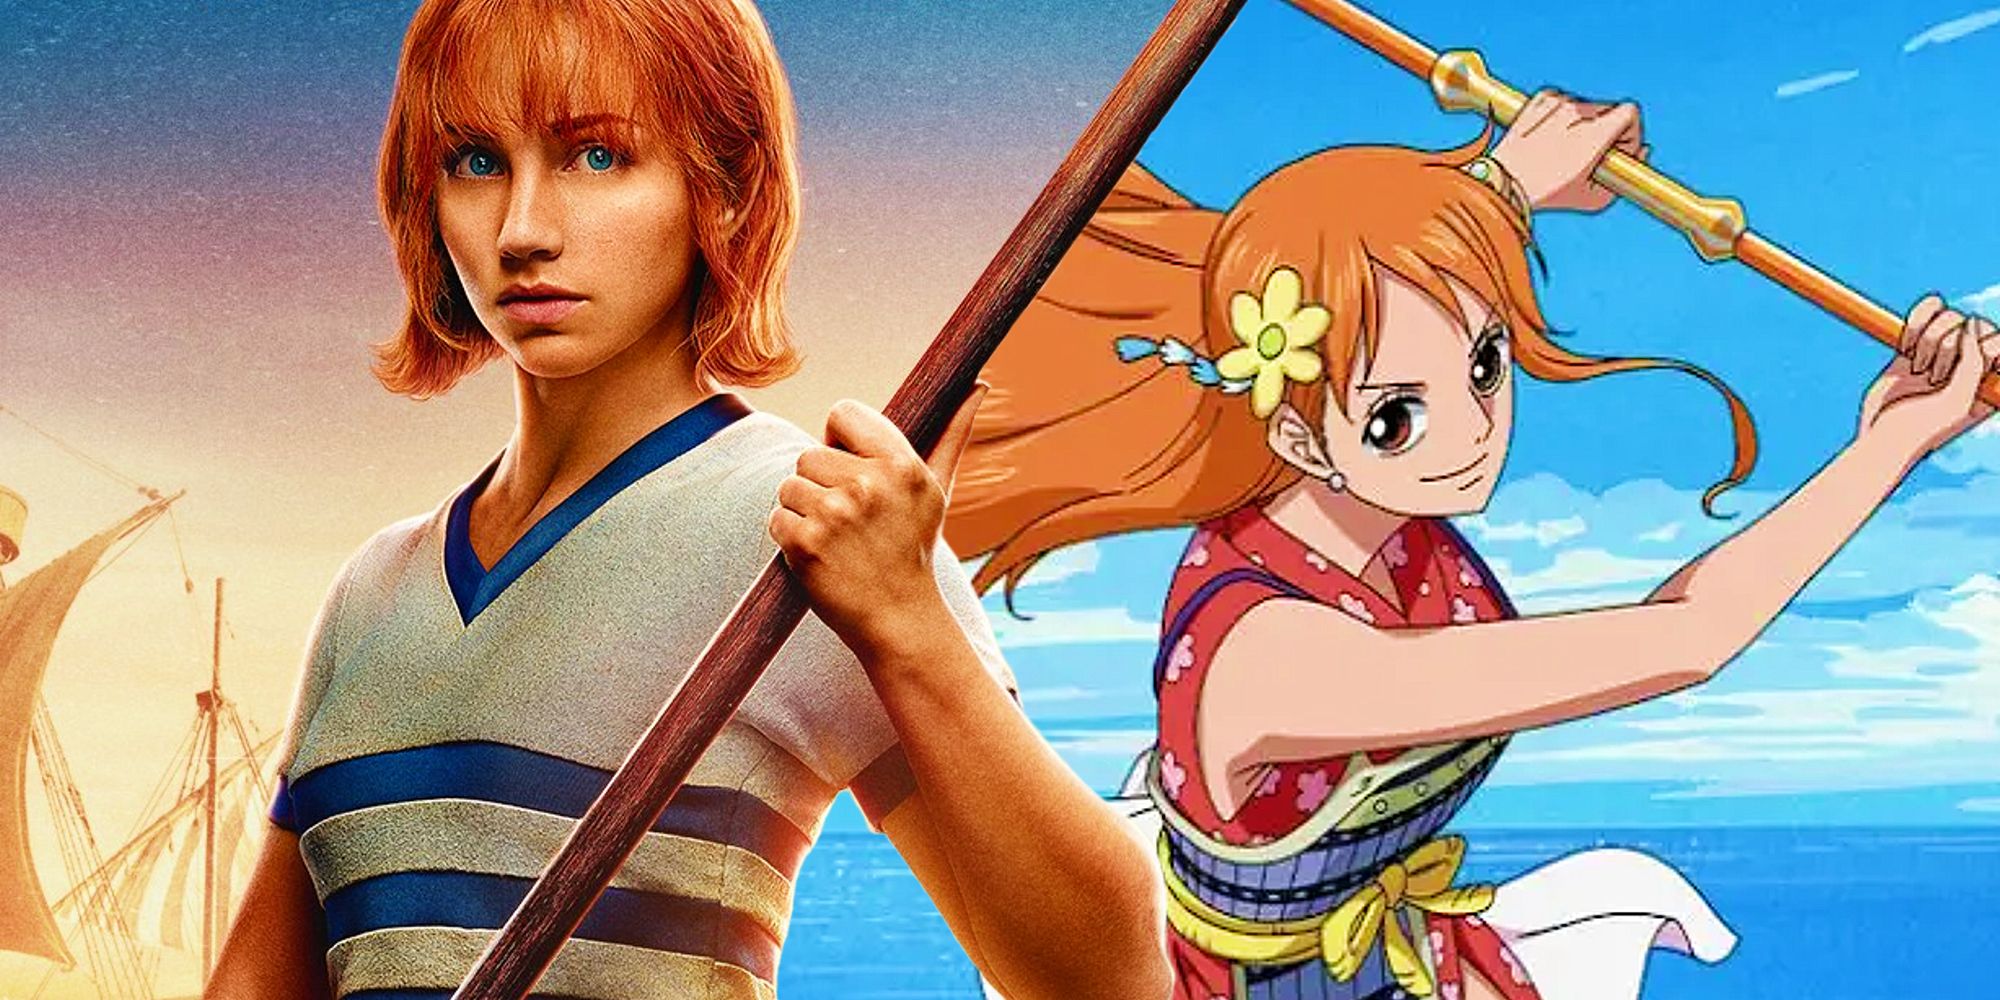 Nami from Netflix's One Piece holding her staff next to her anime character